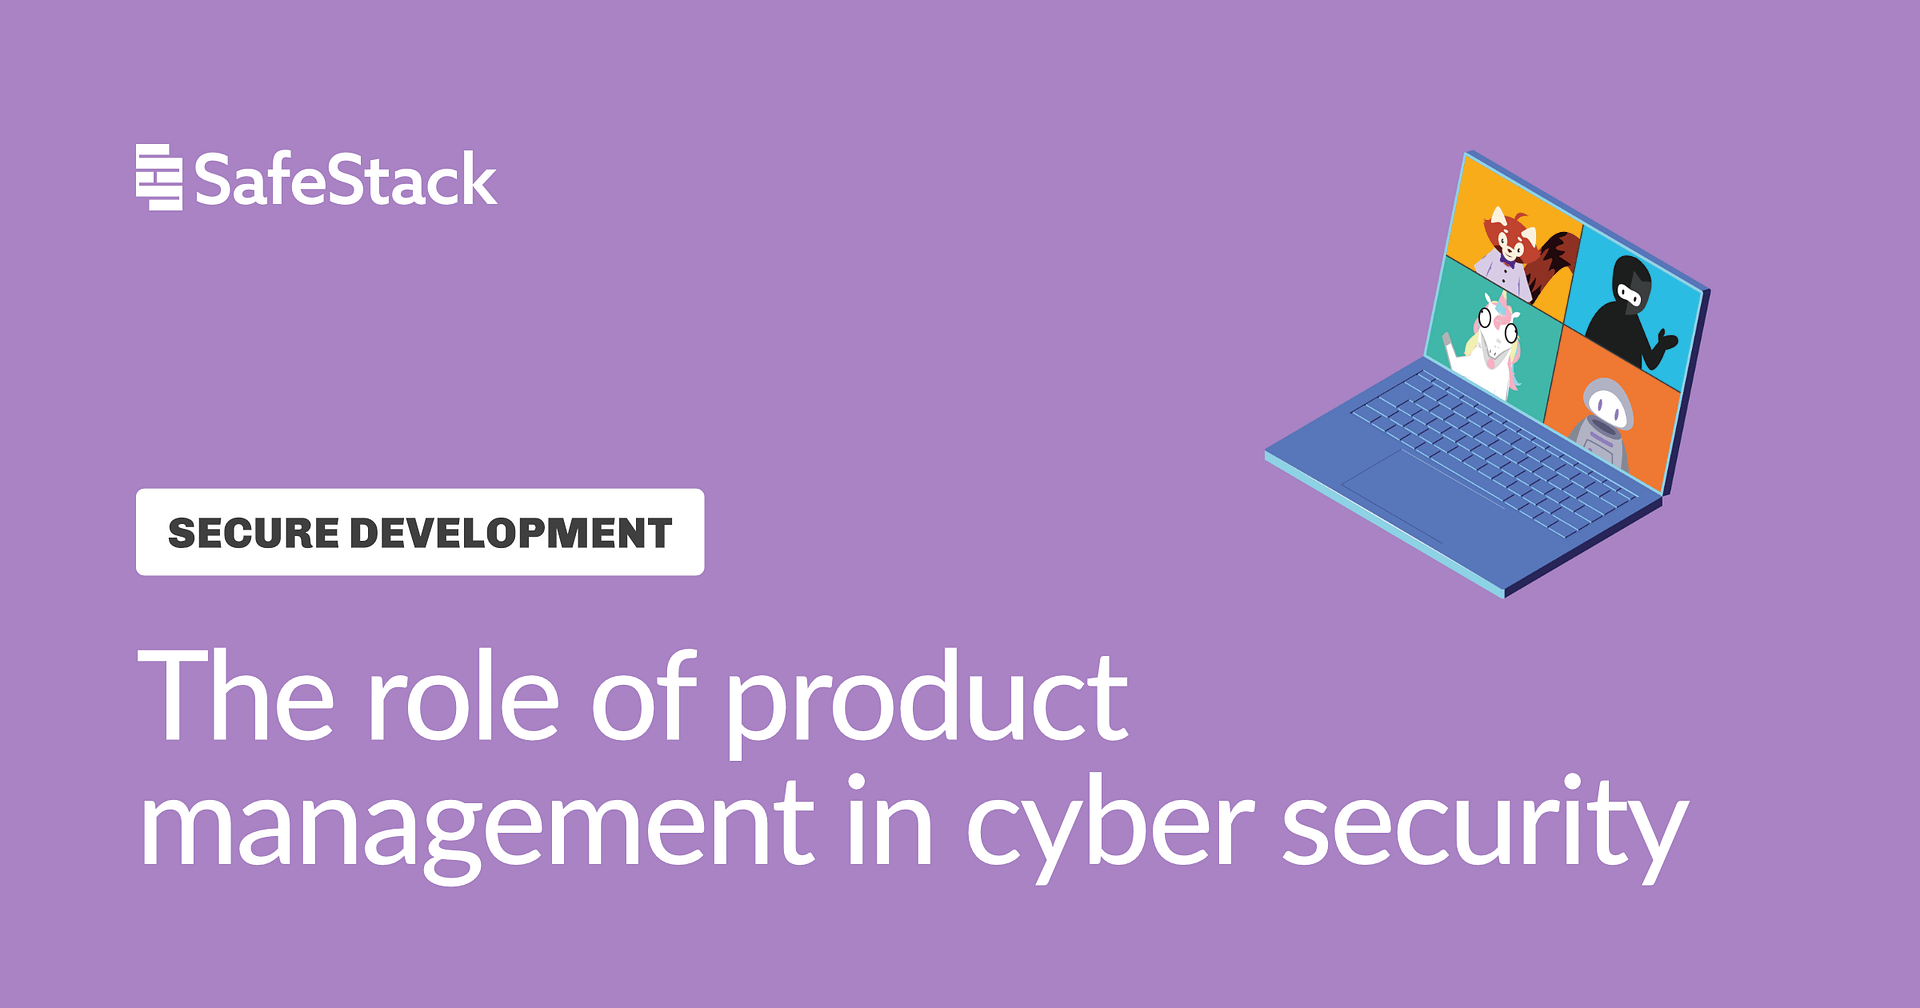 "The role of product management in cyber security" title with SafeStack mascot image